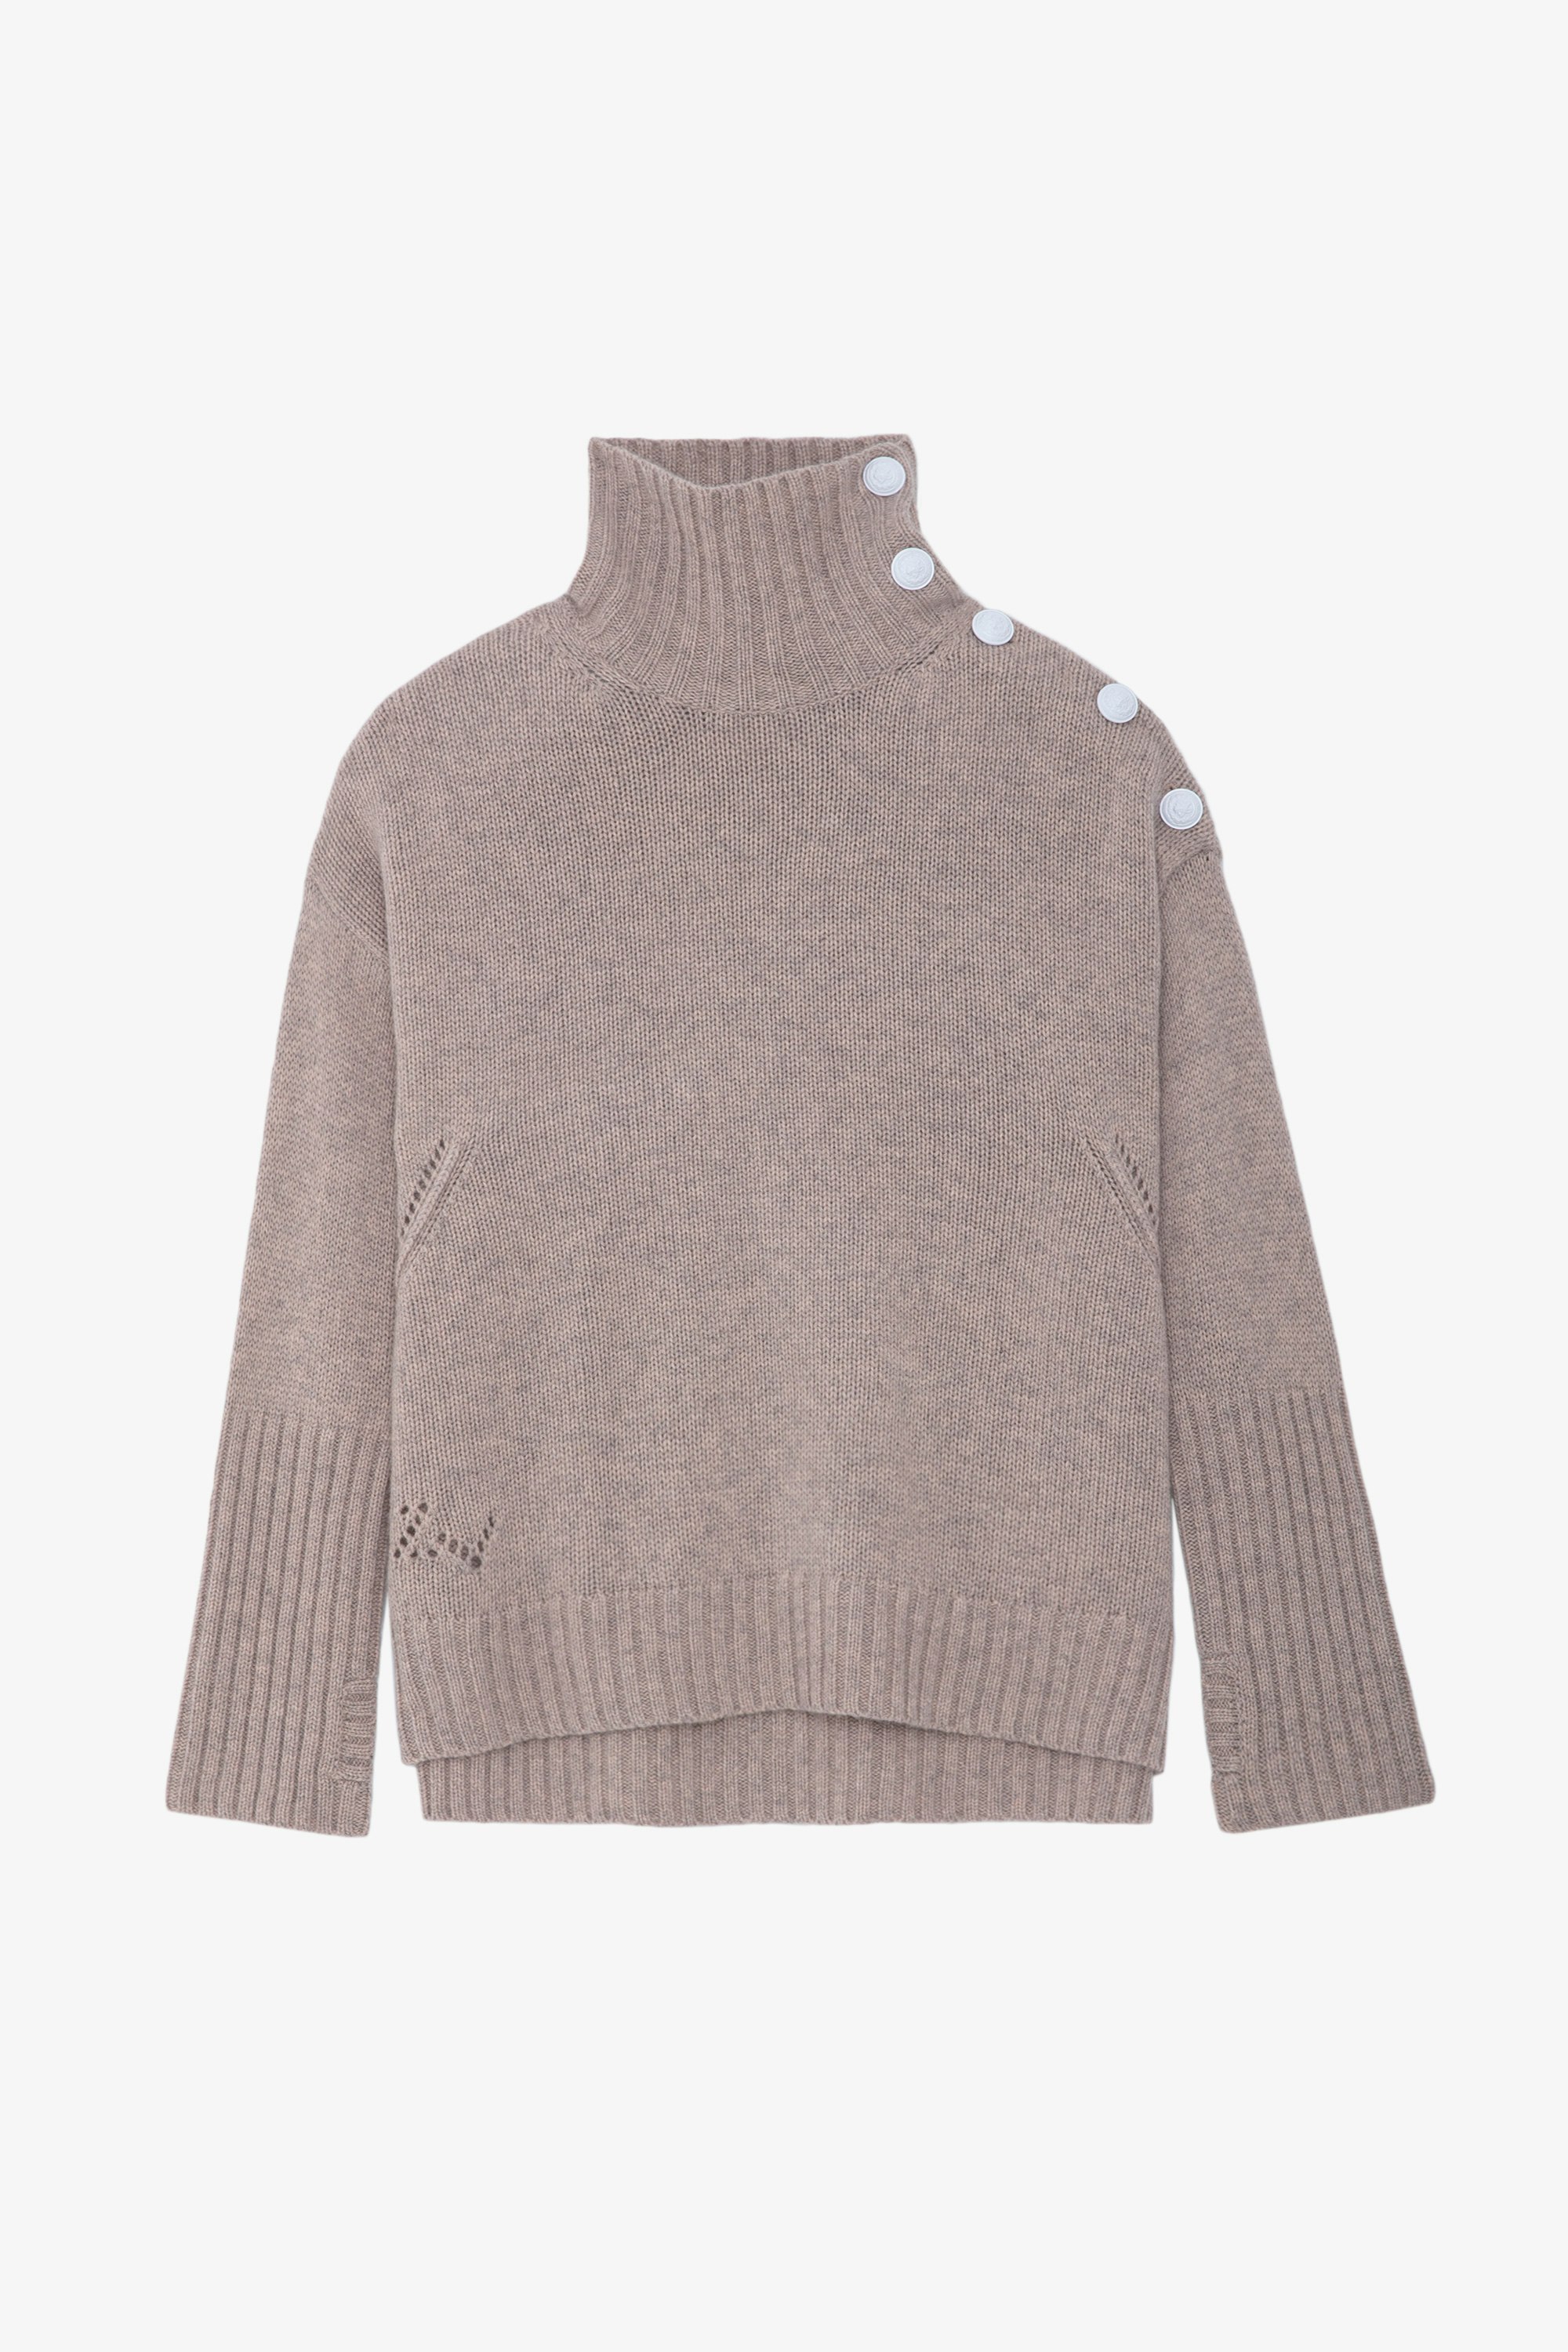 Alma カシミヤニット - Pale pink cashmere mock-neck jumper with long sleeves and buttons on the shoulder.